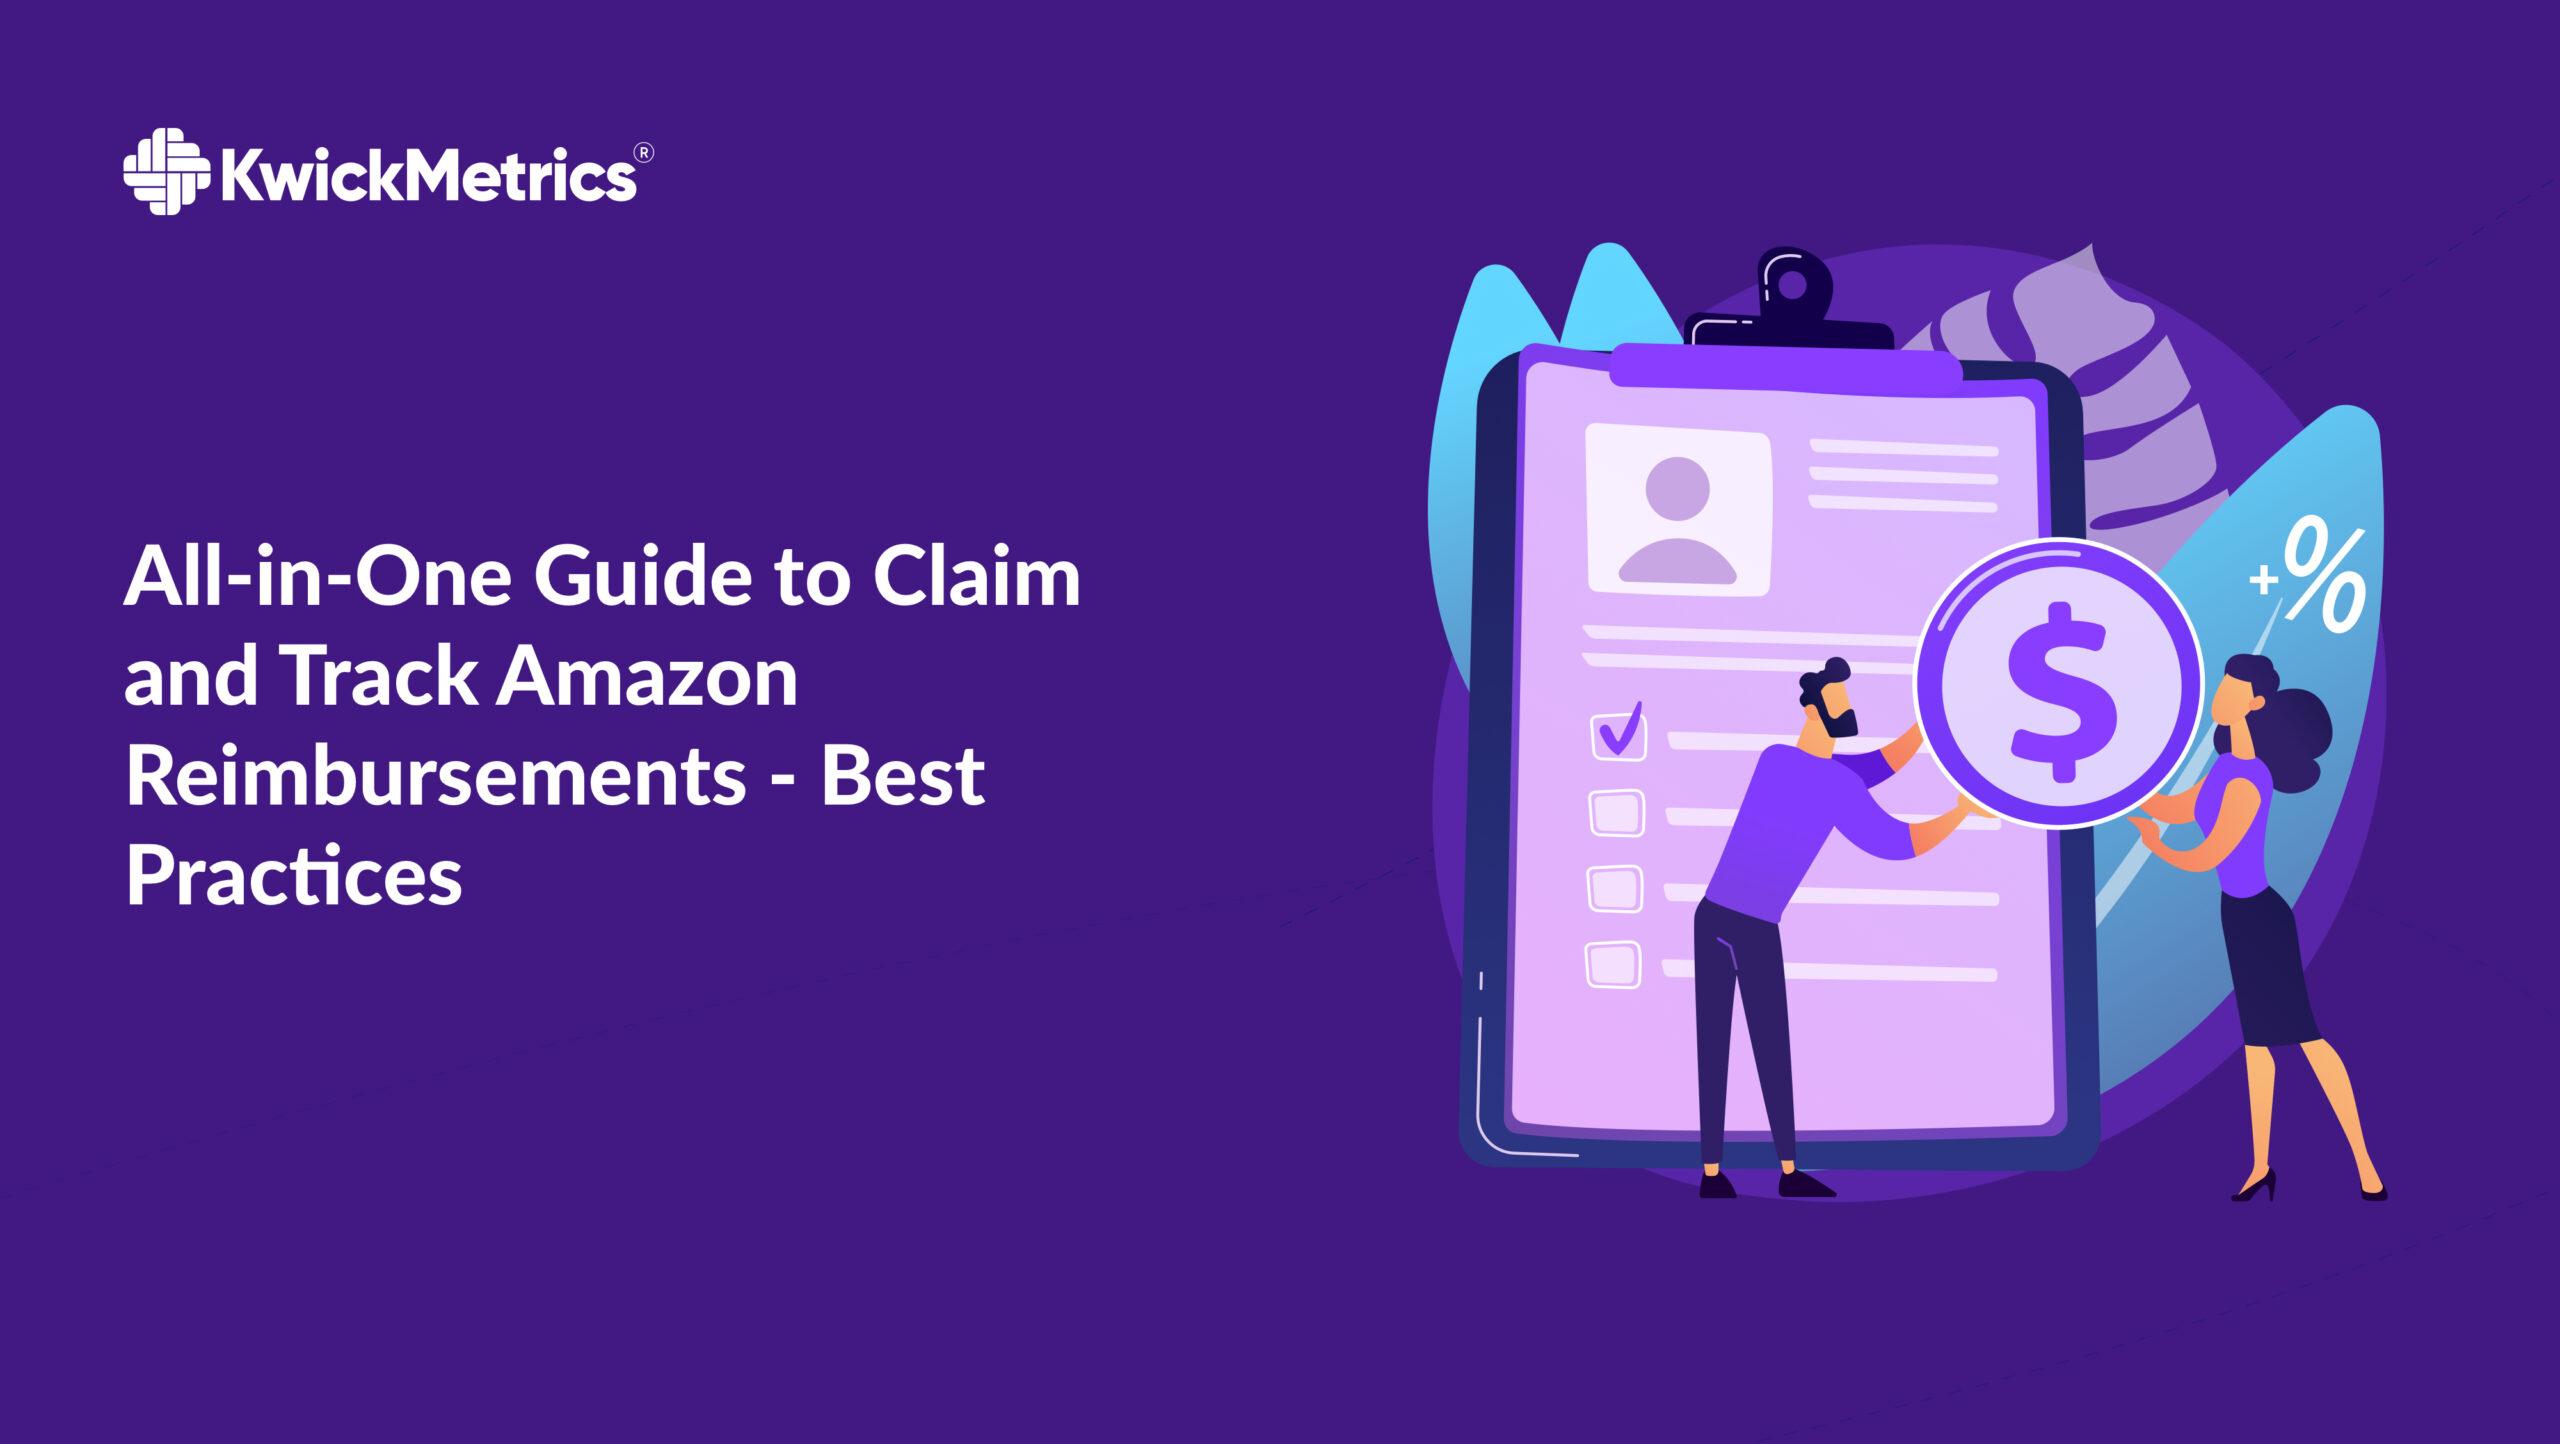 All-in-one Guide to Claim and Track Amazon Reimbursement - Best Practices 